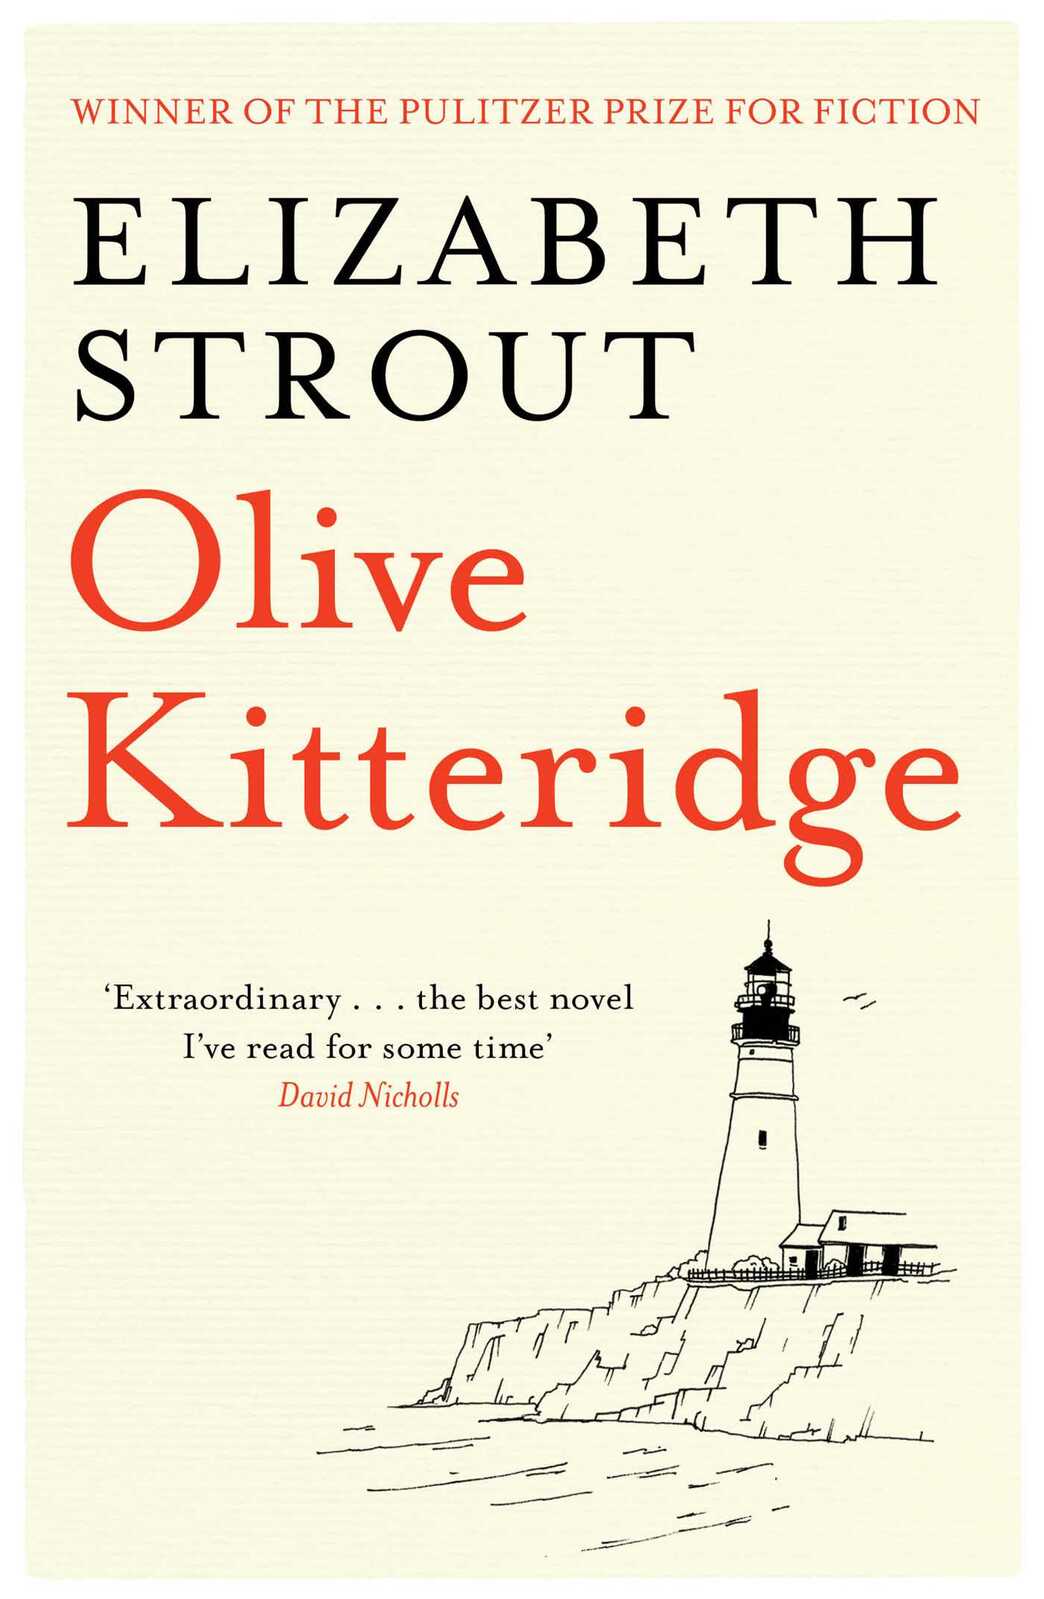 The front cover of Elizabeth Strout's book, Olive Kitteridge, which is pale yellow and features an illustration of a light house